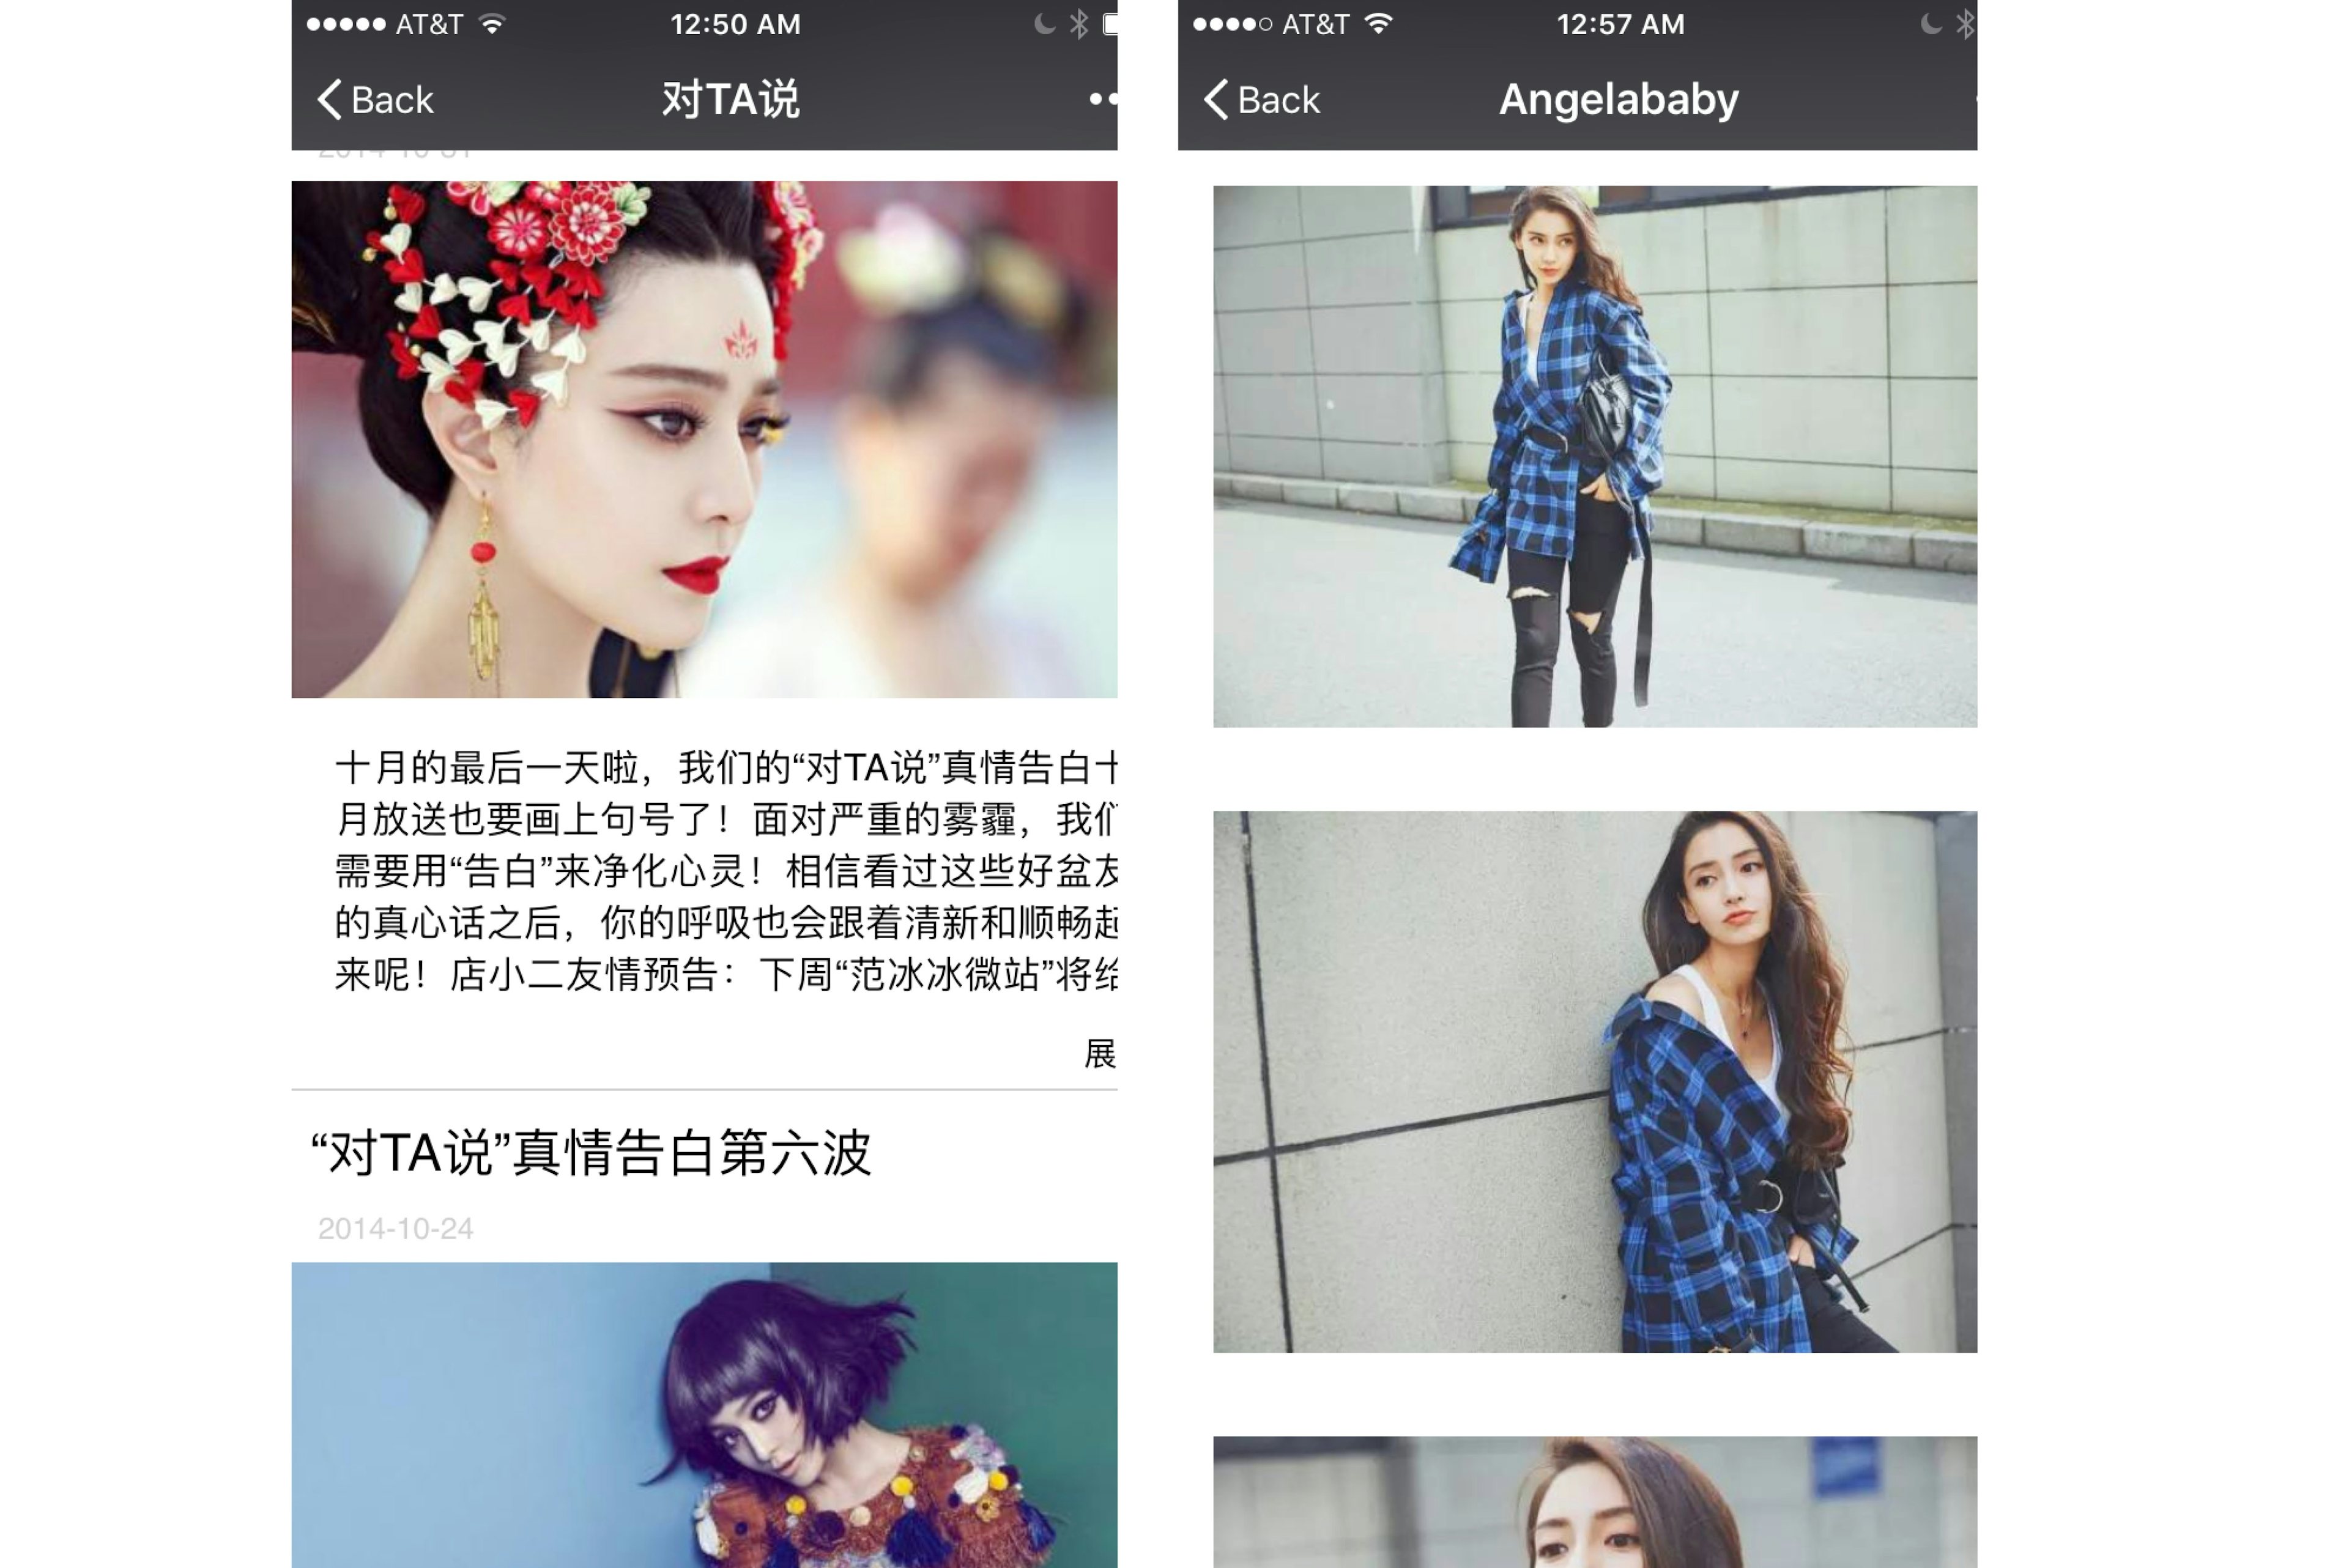 The WeChat accounts of celebrity KOLs Fan Bingbing (L) and Angelababy (R).